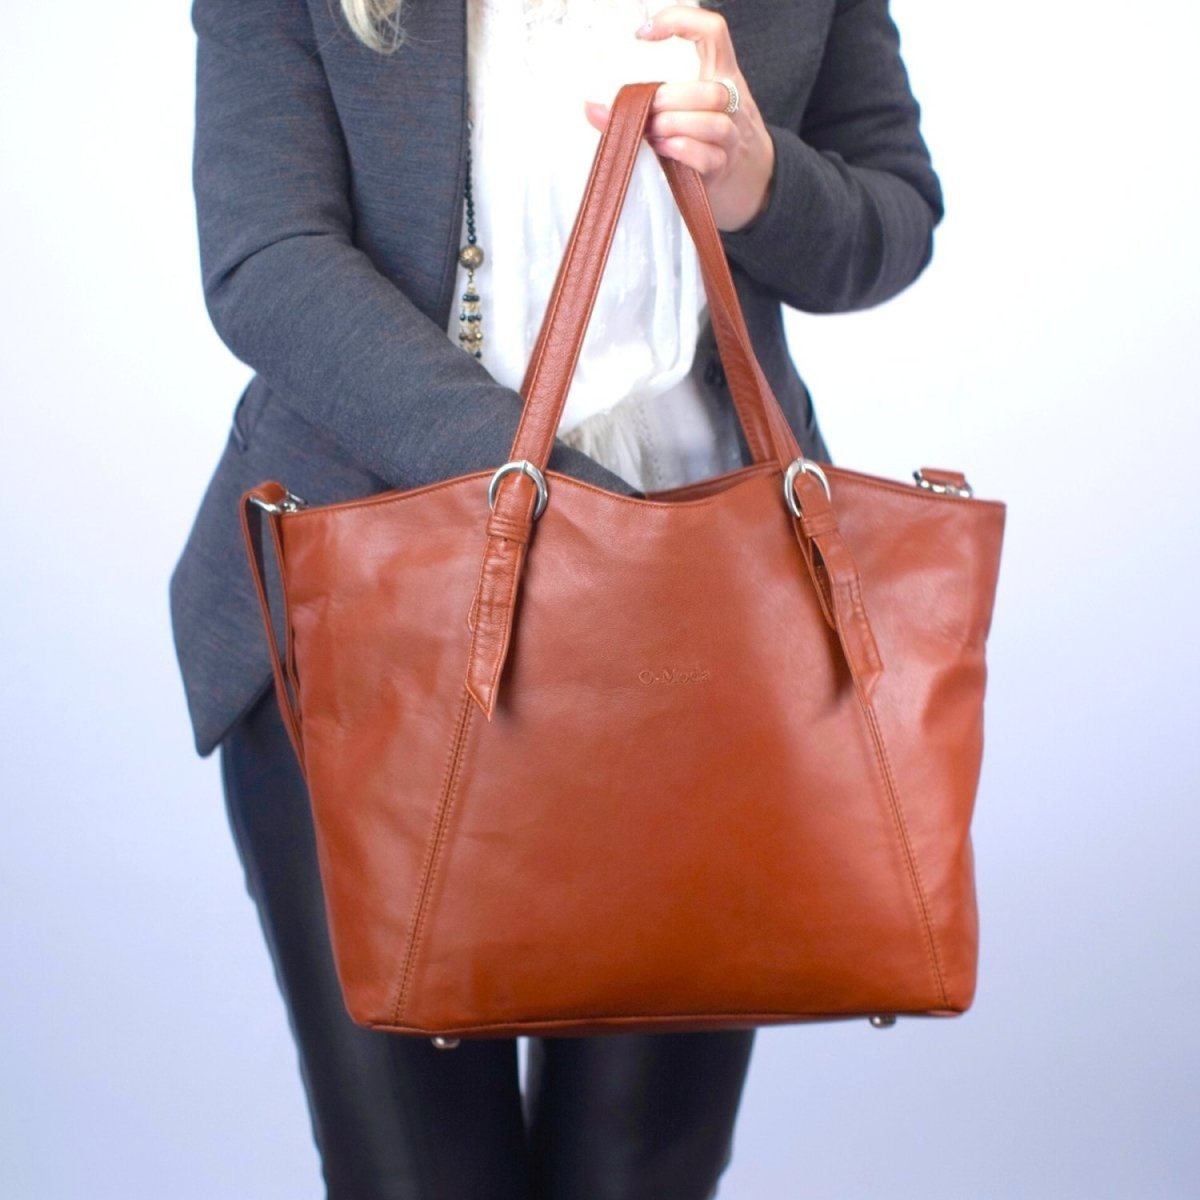 New York Soft Leather Tote Bag - Ozzell London